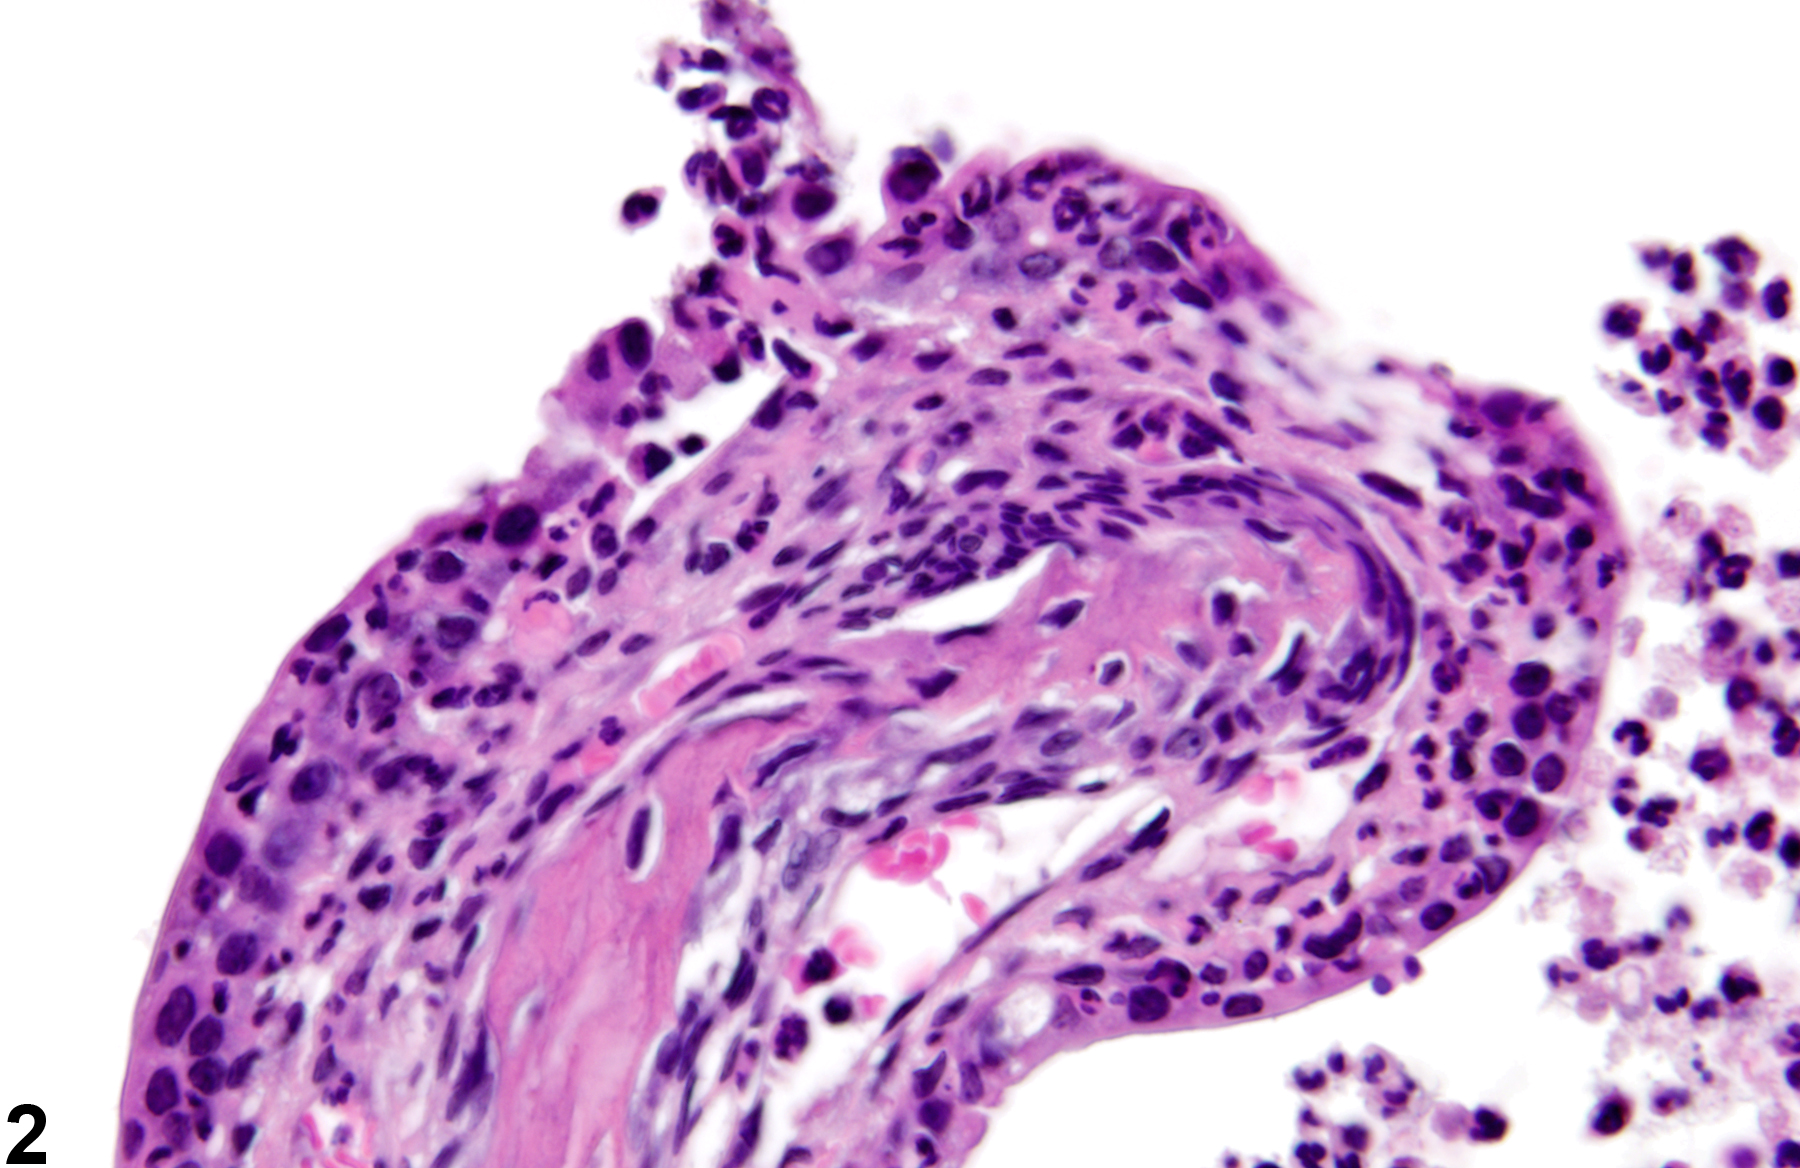 Image of necrosis in the nose, transitional epithelium from a female B6C3F1/N mouse in a chronic study